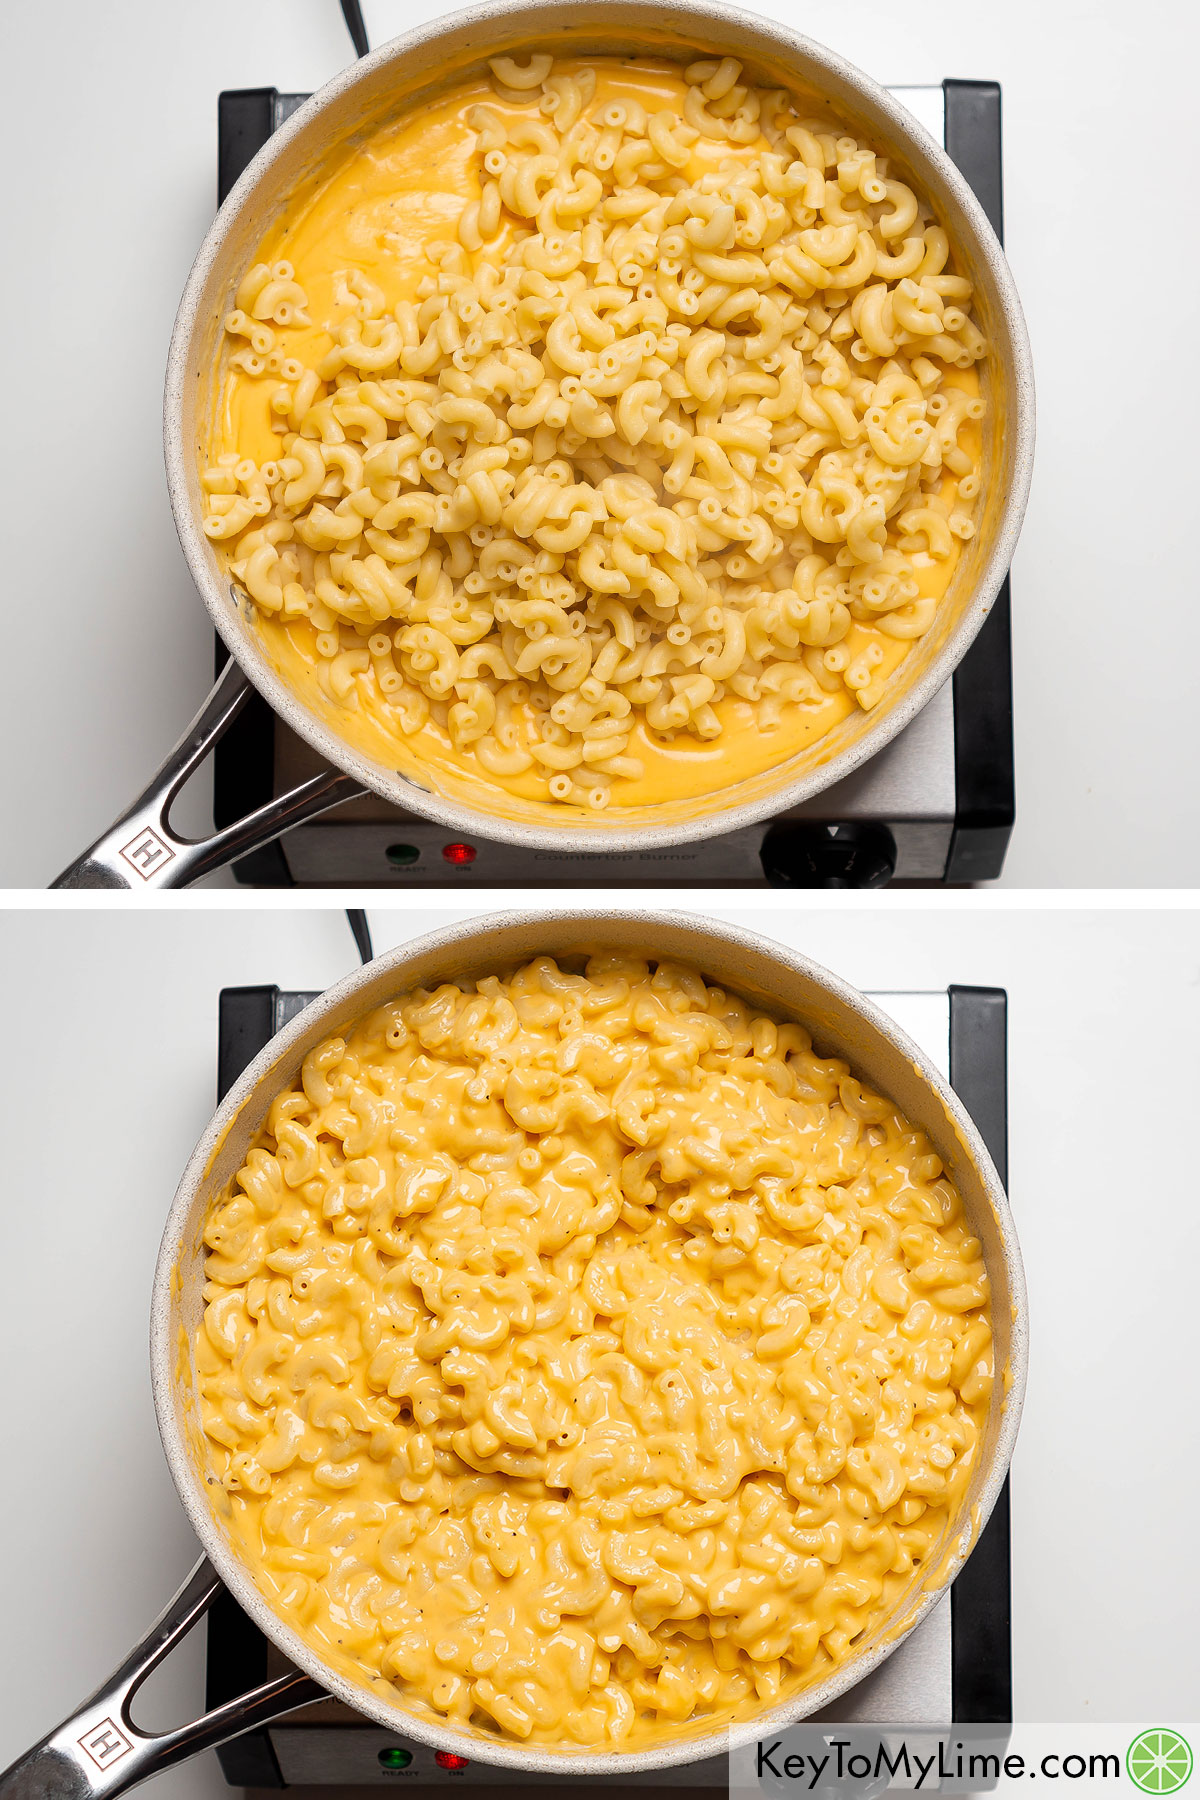 Adding the cooked macaroni to a the pot and mixing.